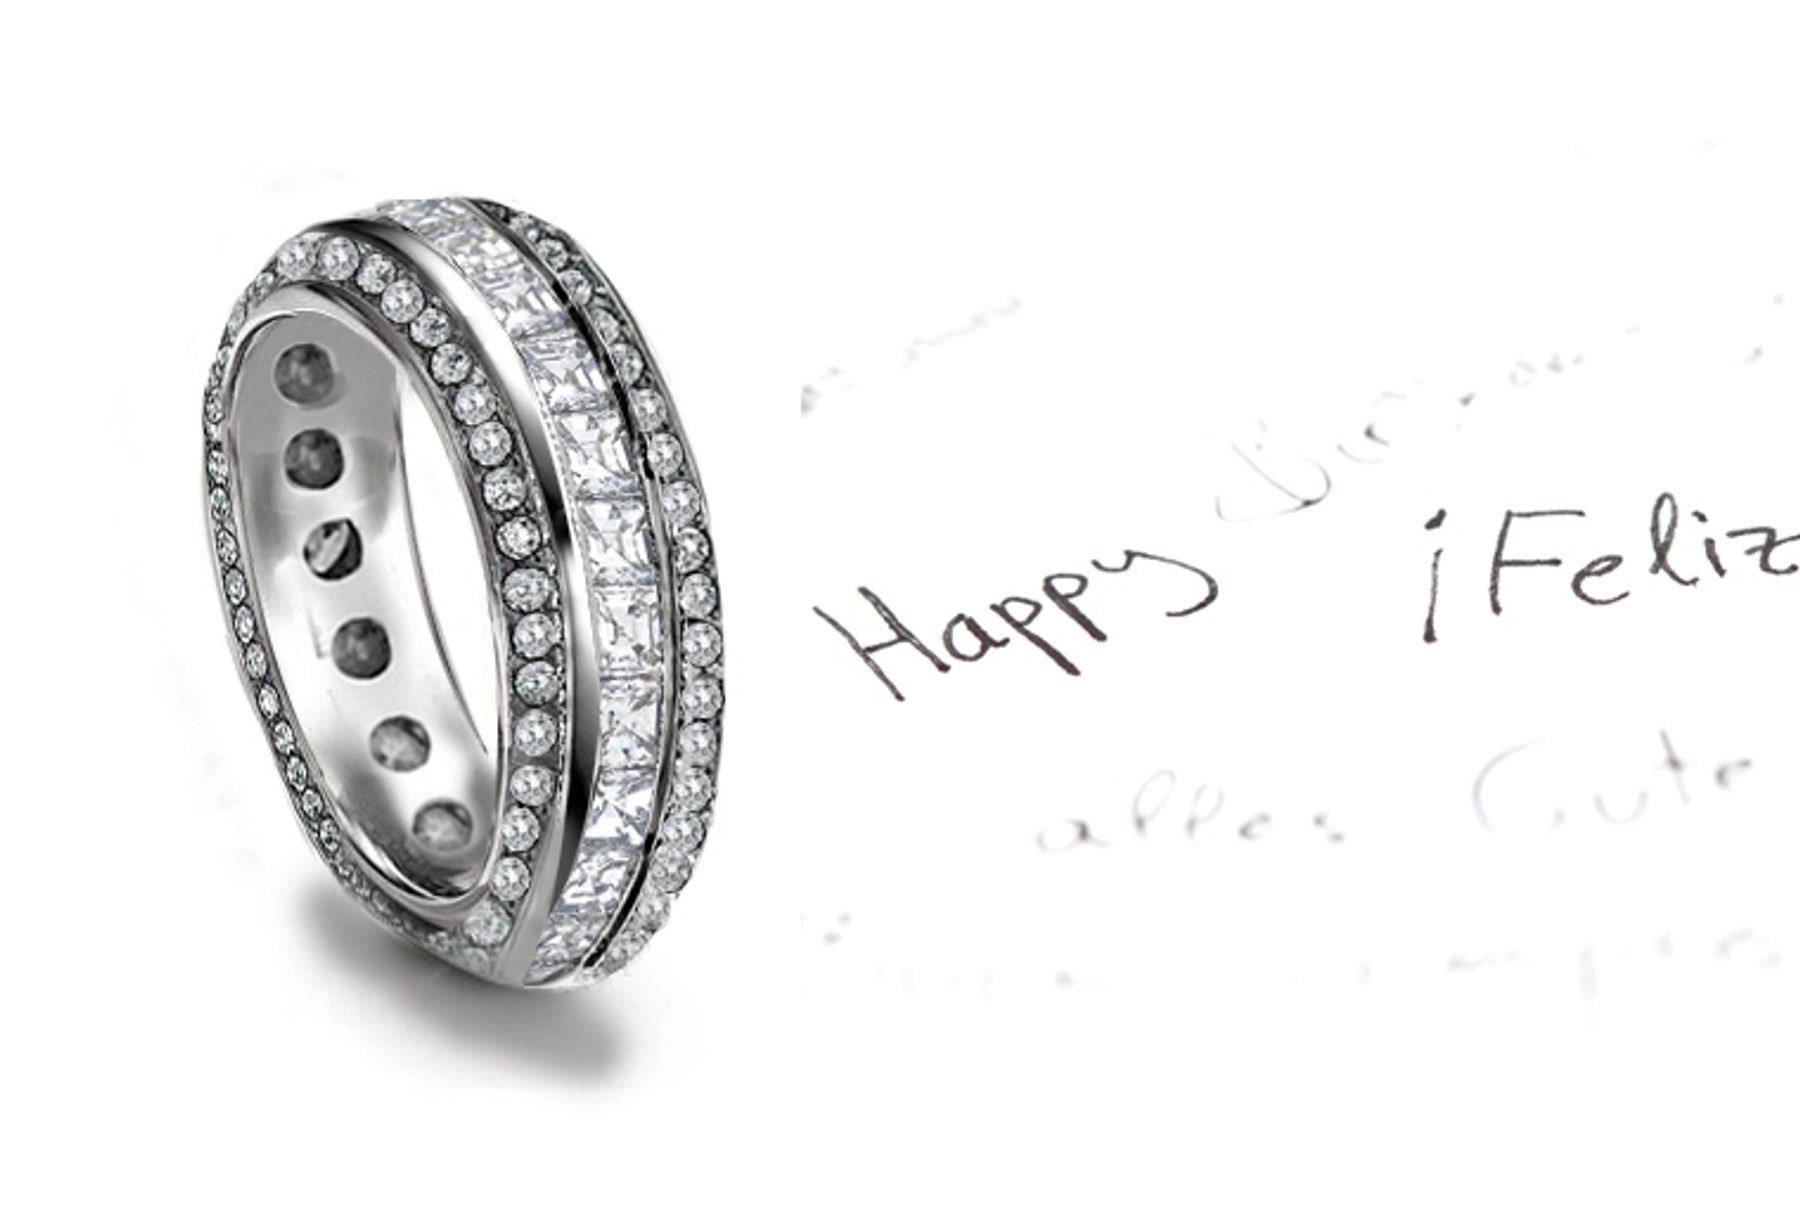 Full Circle of Love: 6 mm Wide Platinum Band Enshrined with Asscher Cut Diamonds Embraced by 2 Rows of Diamonds